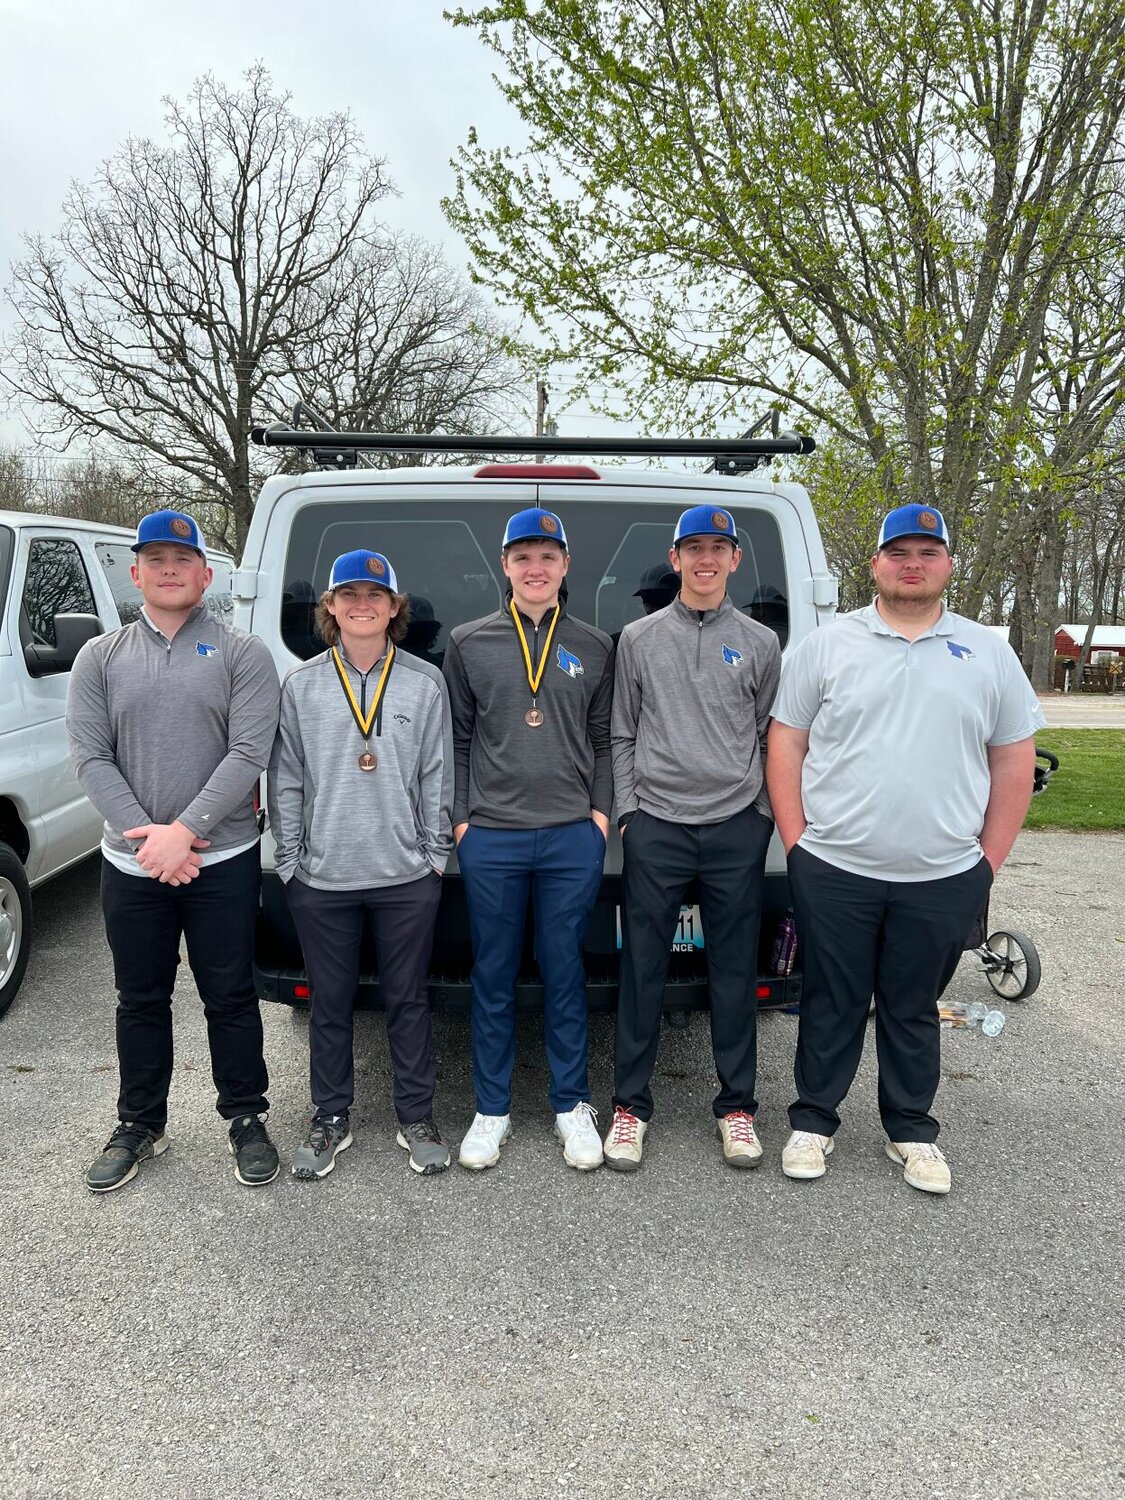 The Marshfield Boys' Golf team is pictured after placing second in the Cassville Invitation on April 6 and having two members earning individual medals.


Contributed Photo by Reggie Smith.